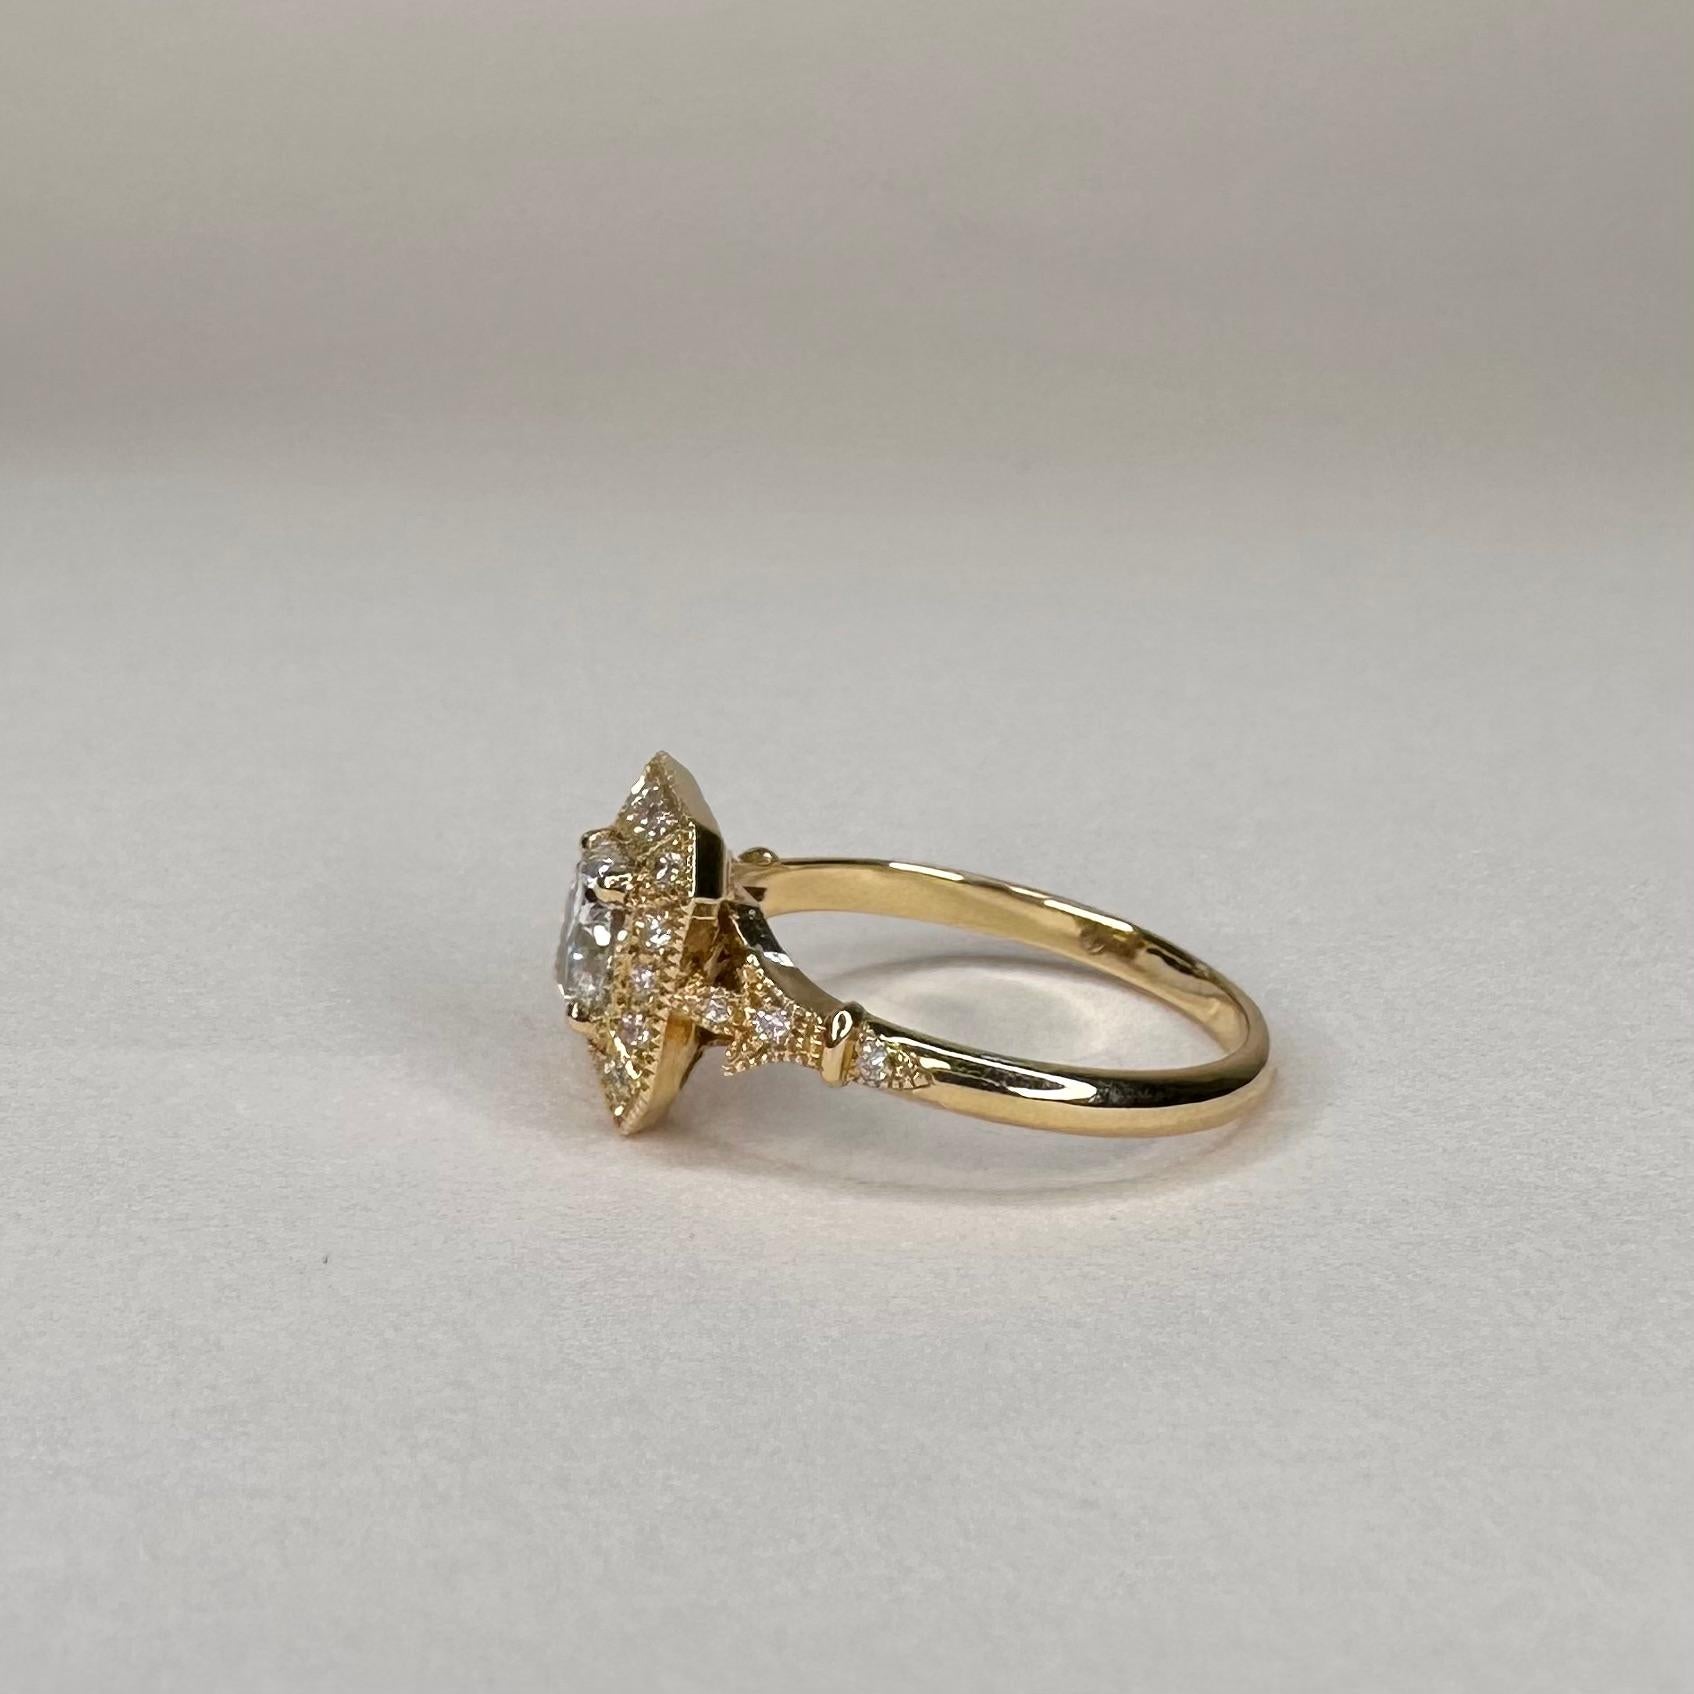 For Sale:  18k Yellow Gold 0.7 Ct Cushion Diamond Ring set with 0.19 Cts of Diamonds 6